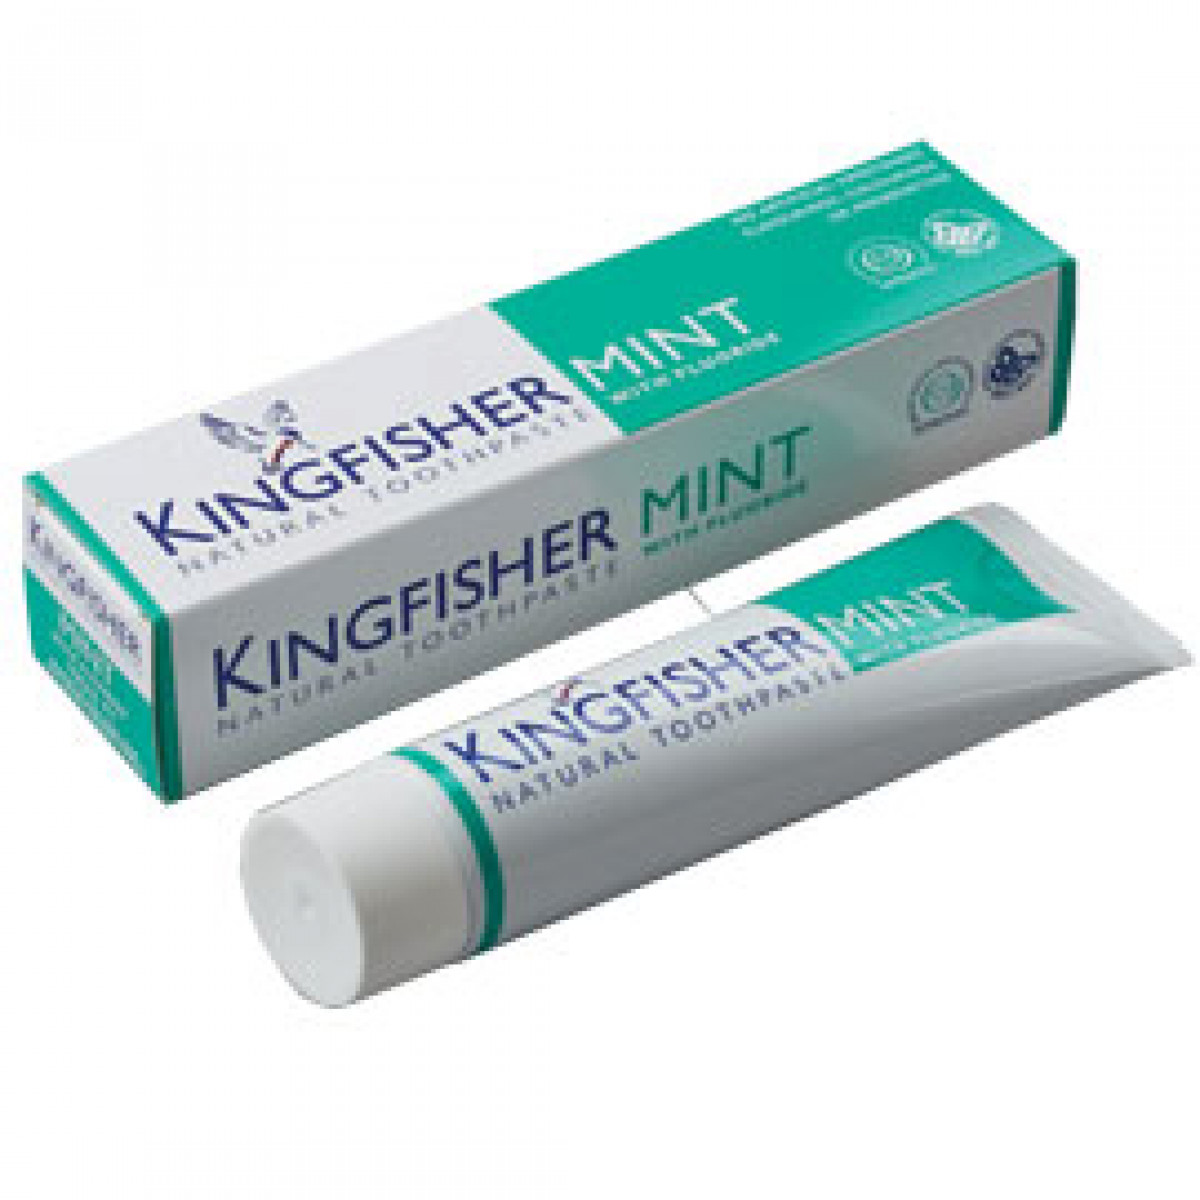 Product picture for Toothpaste - Mint & Fluoride